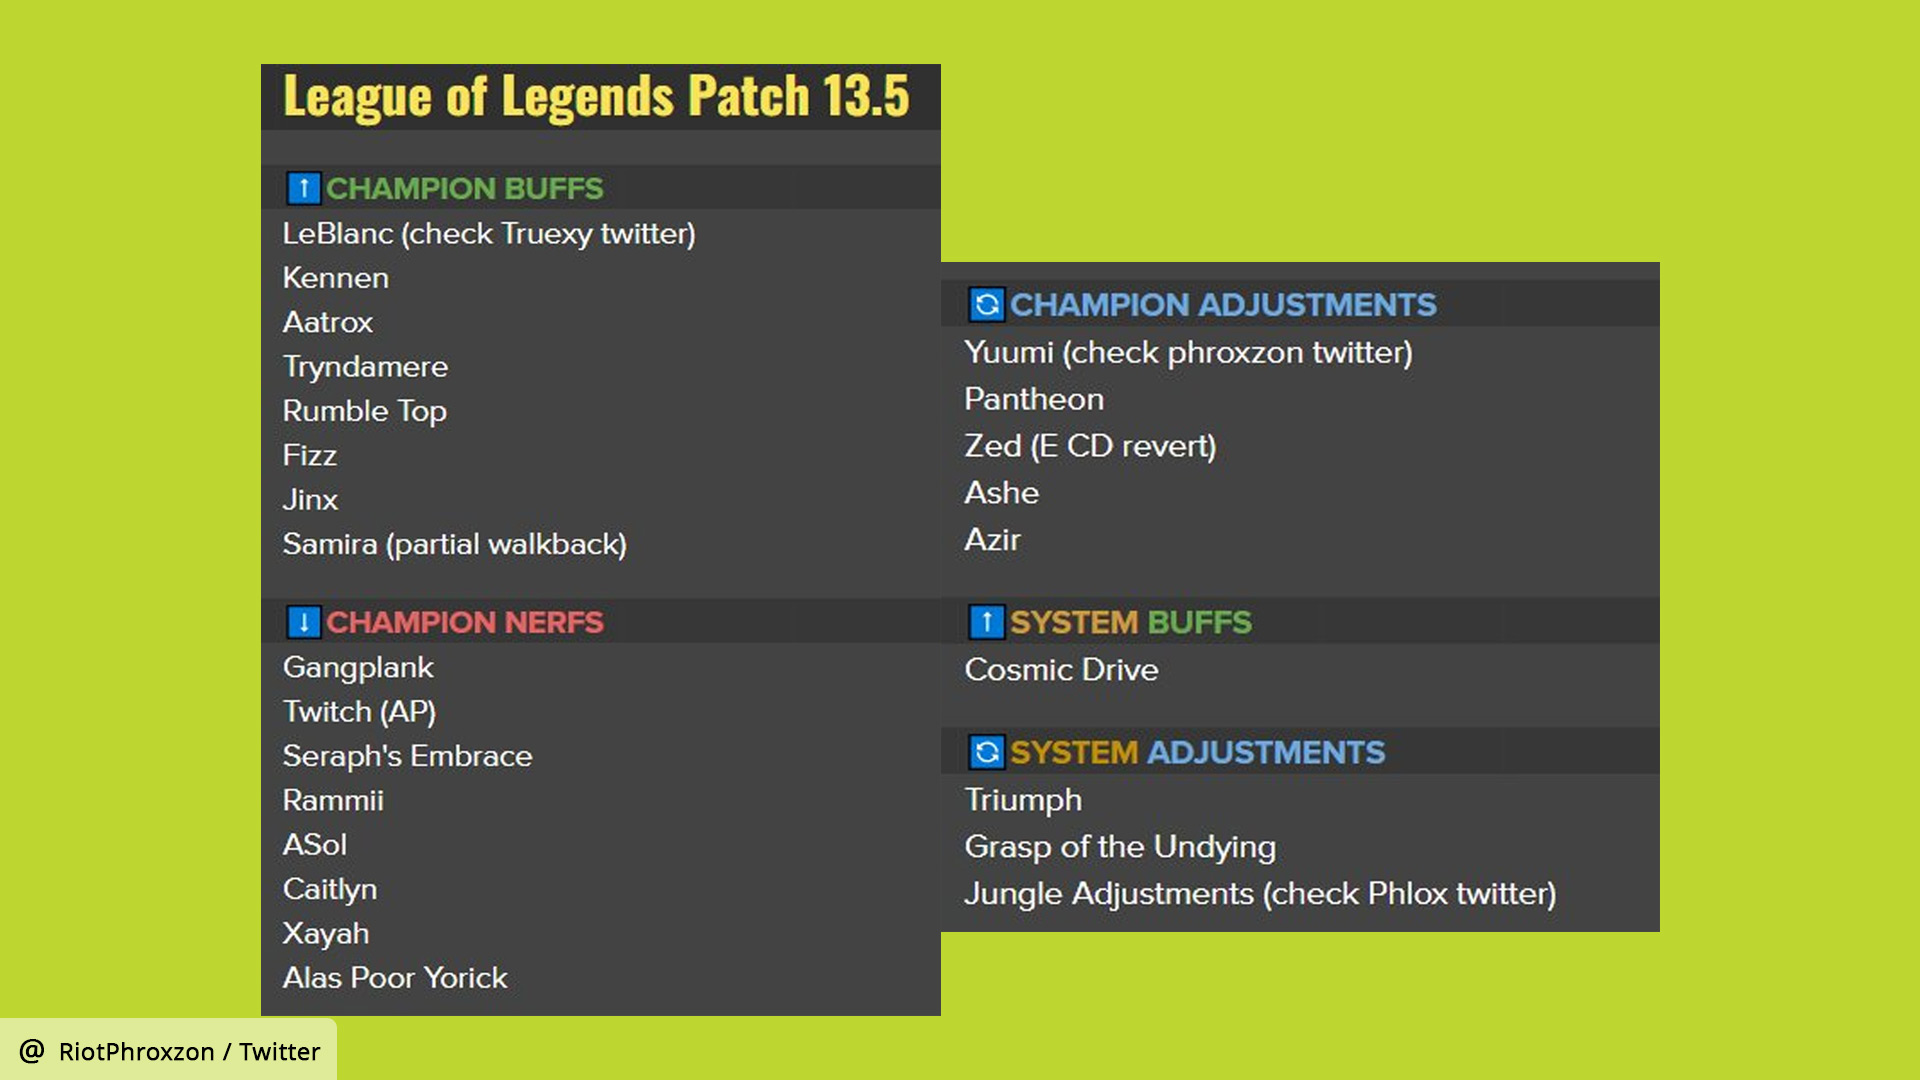 League of Legends Patch 13.8: PatchNotes, Champion Changes and